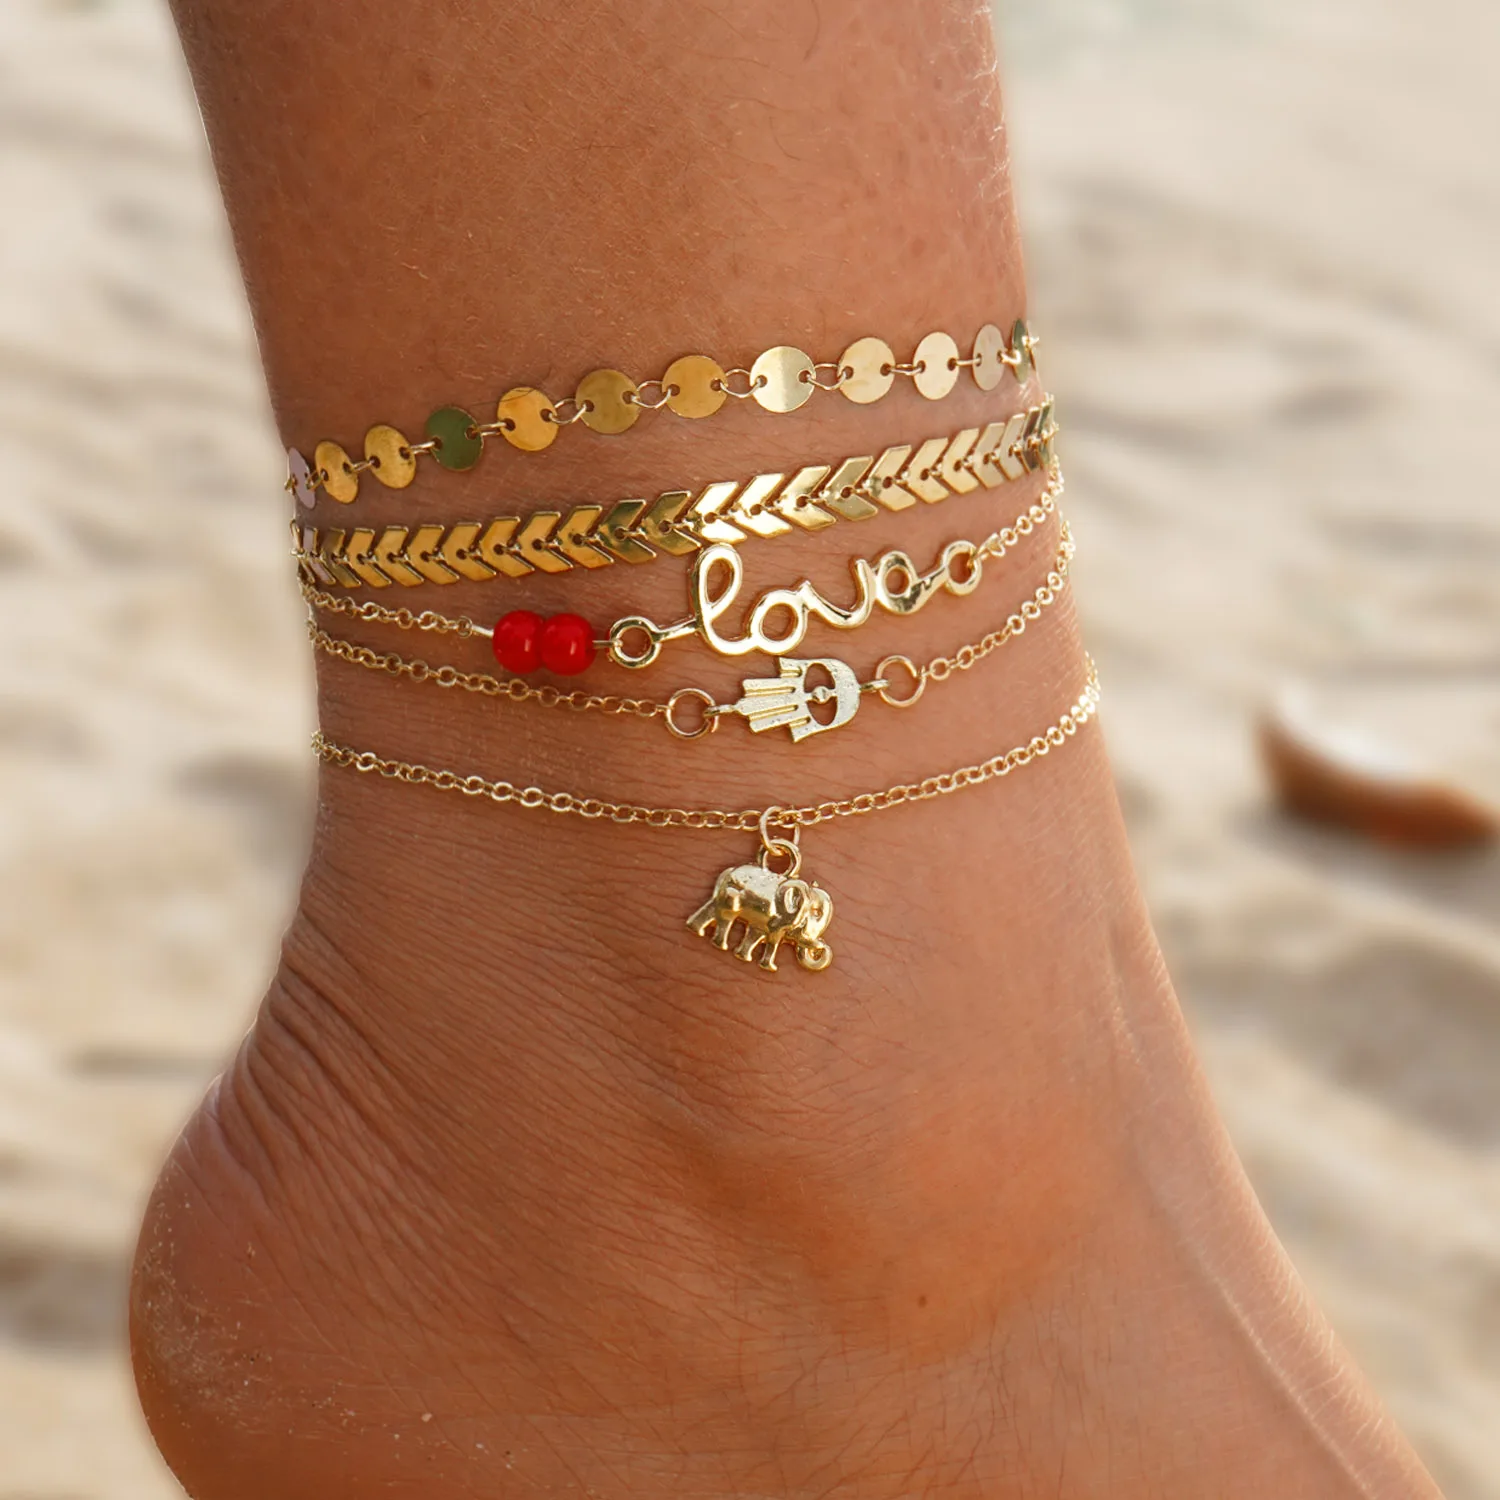 KINFOLK Anklet Gold Color Chain Anklet Bracelet For Womenon the leg Beach Barefoot Foot-Chain Jewelry 2023 Accessories